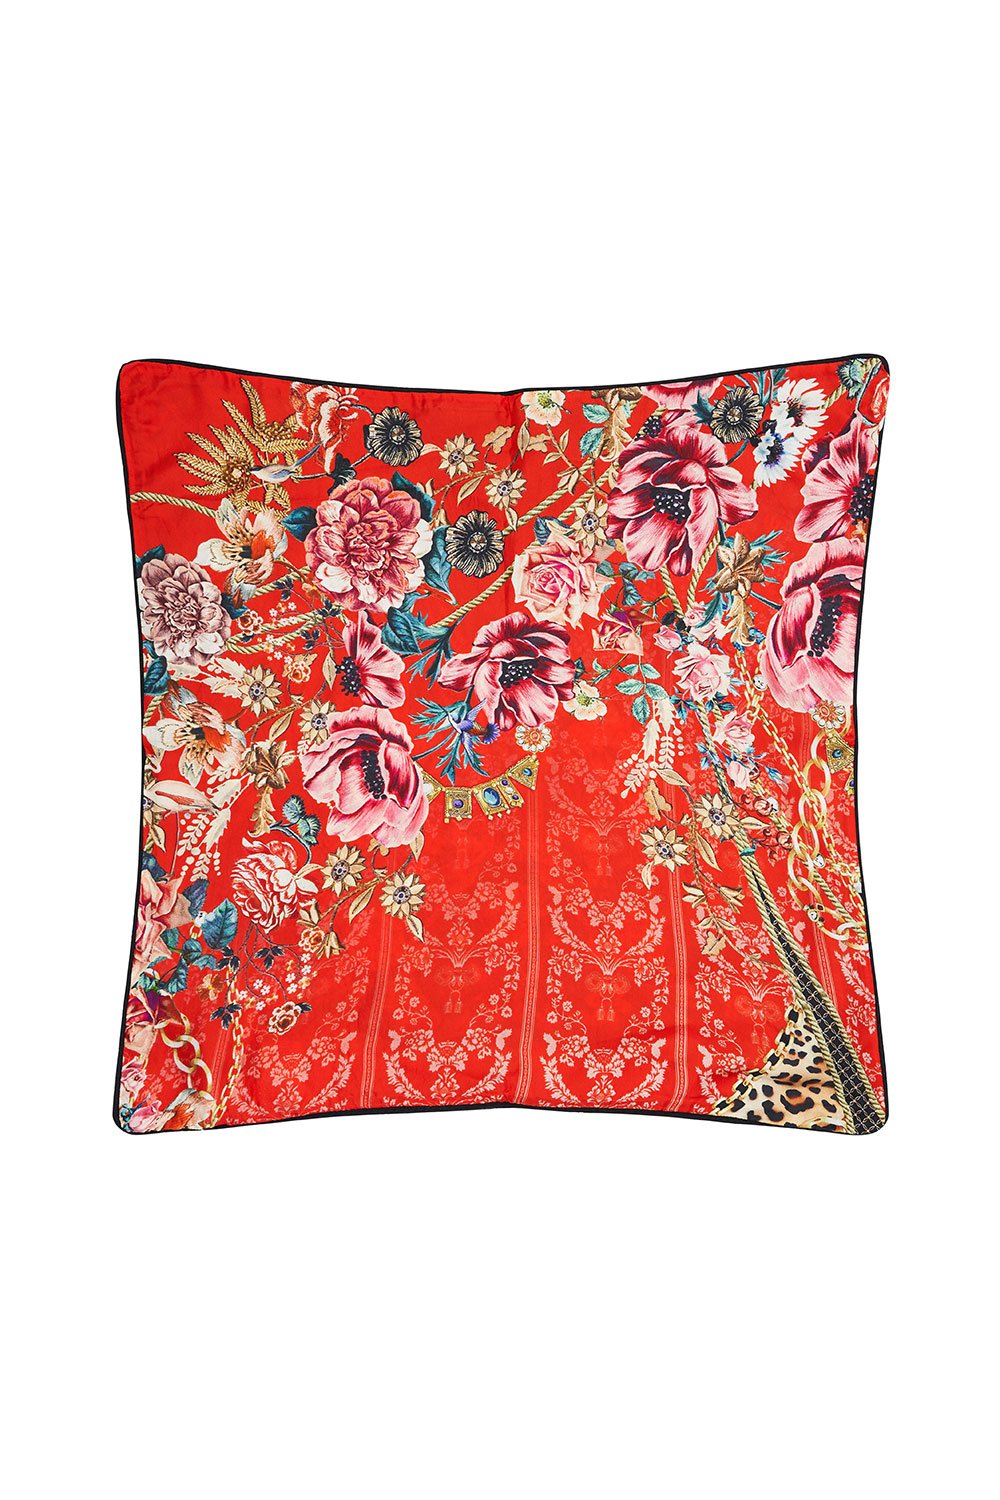 LARGE SQUARE CUSHION BELLE OF THE BAROQUE